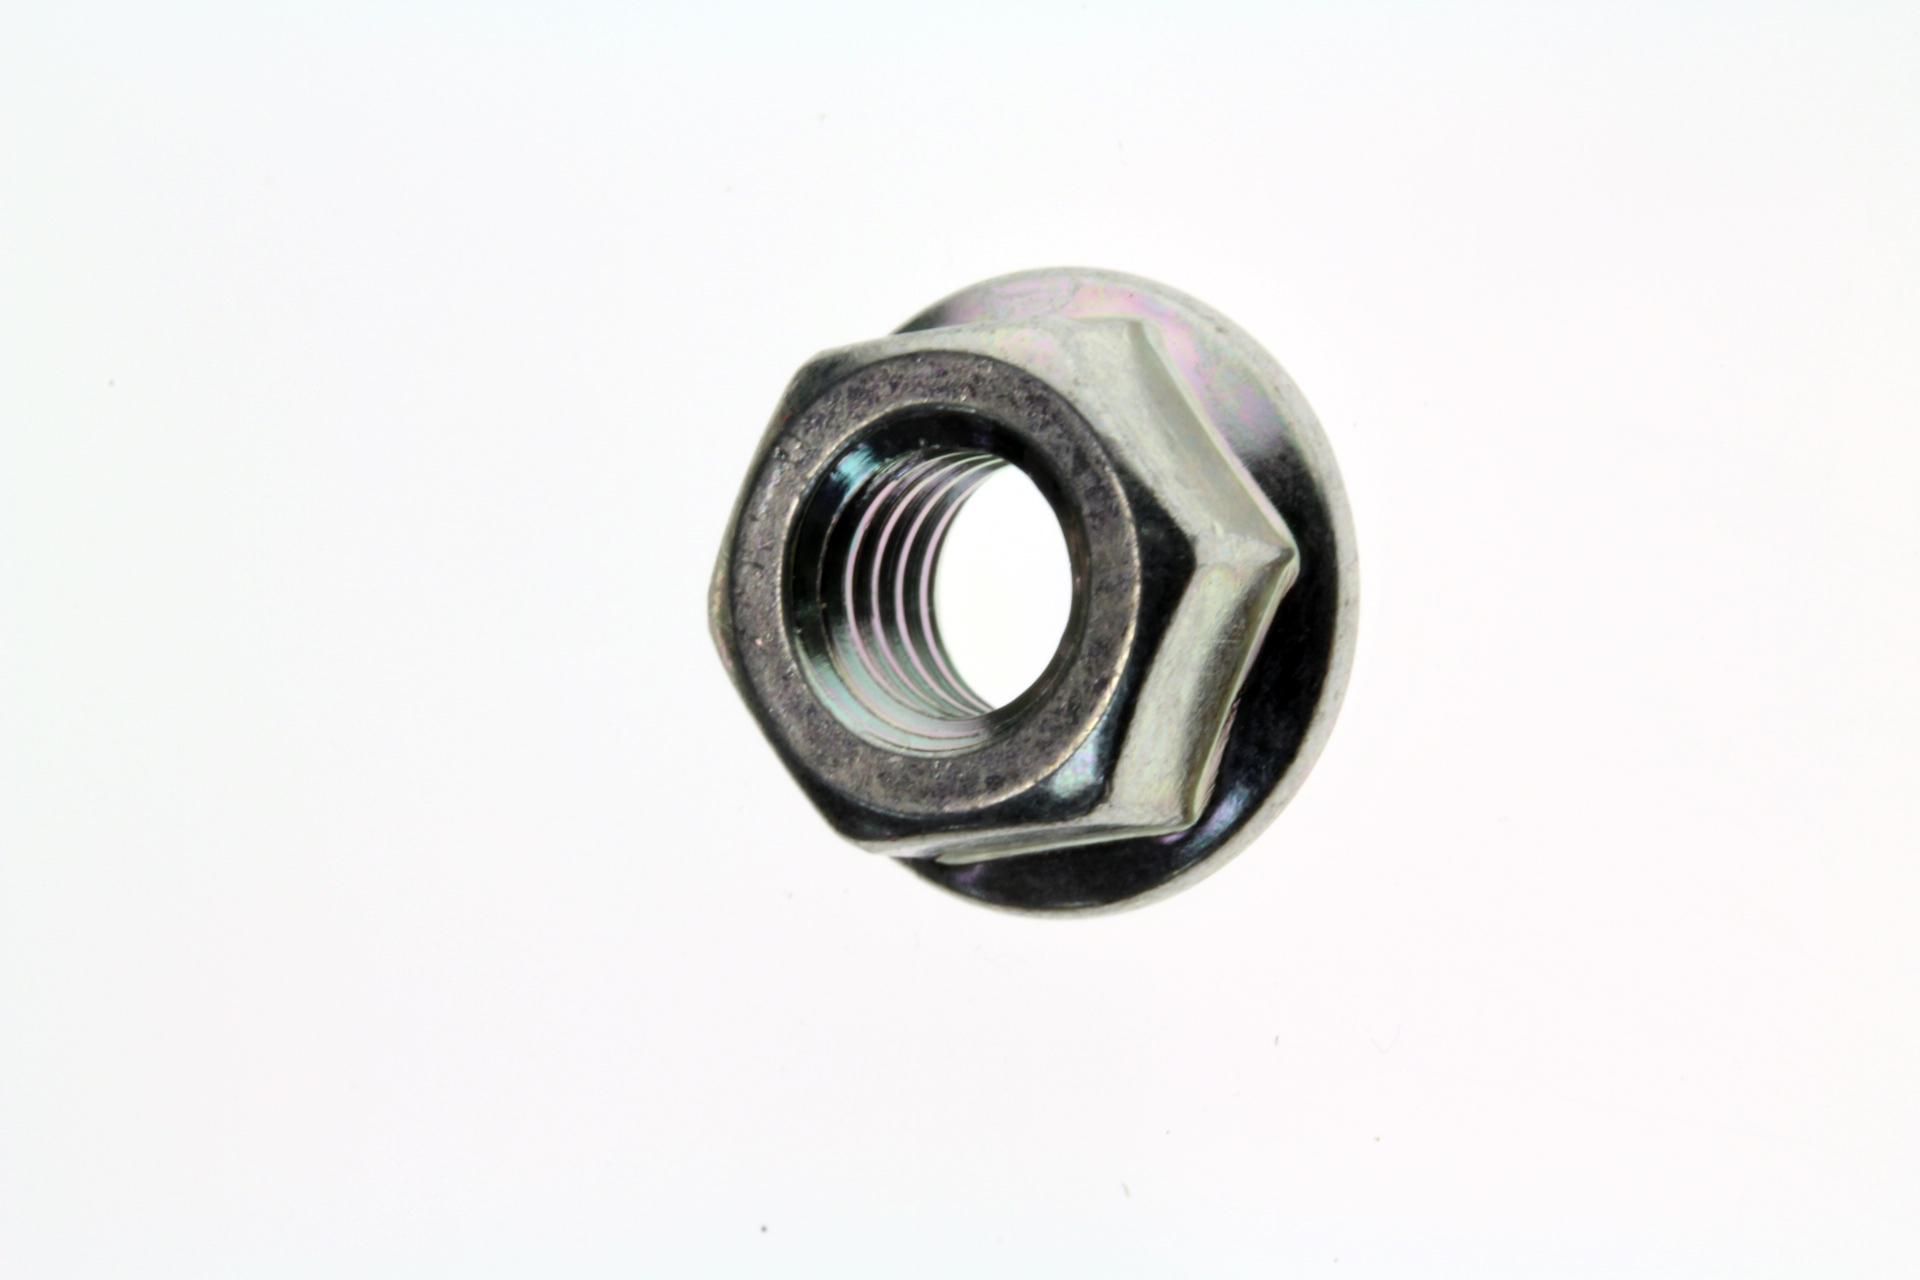 92015-1193 NUT,FLANGED,6MM